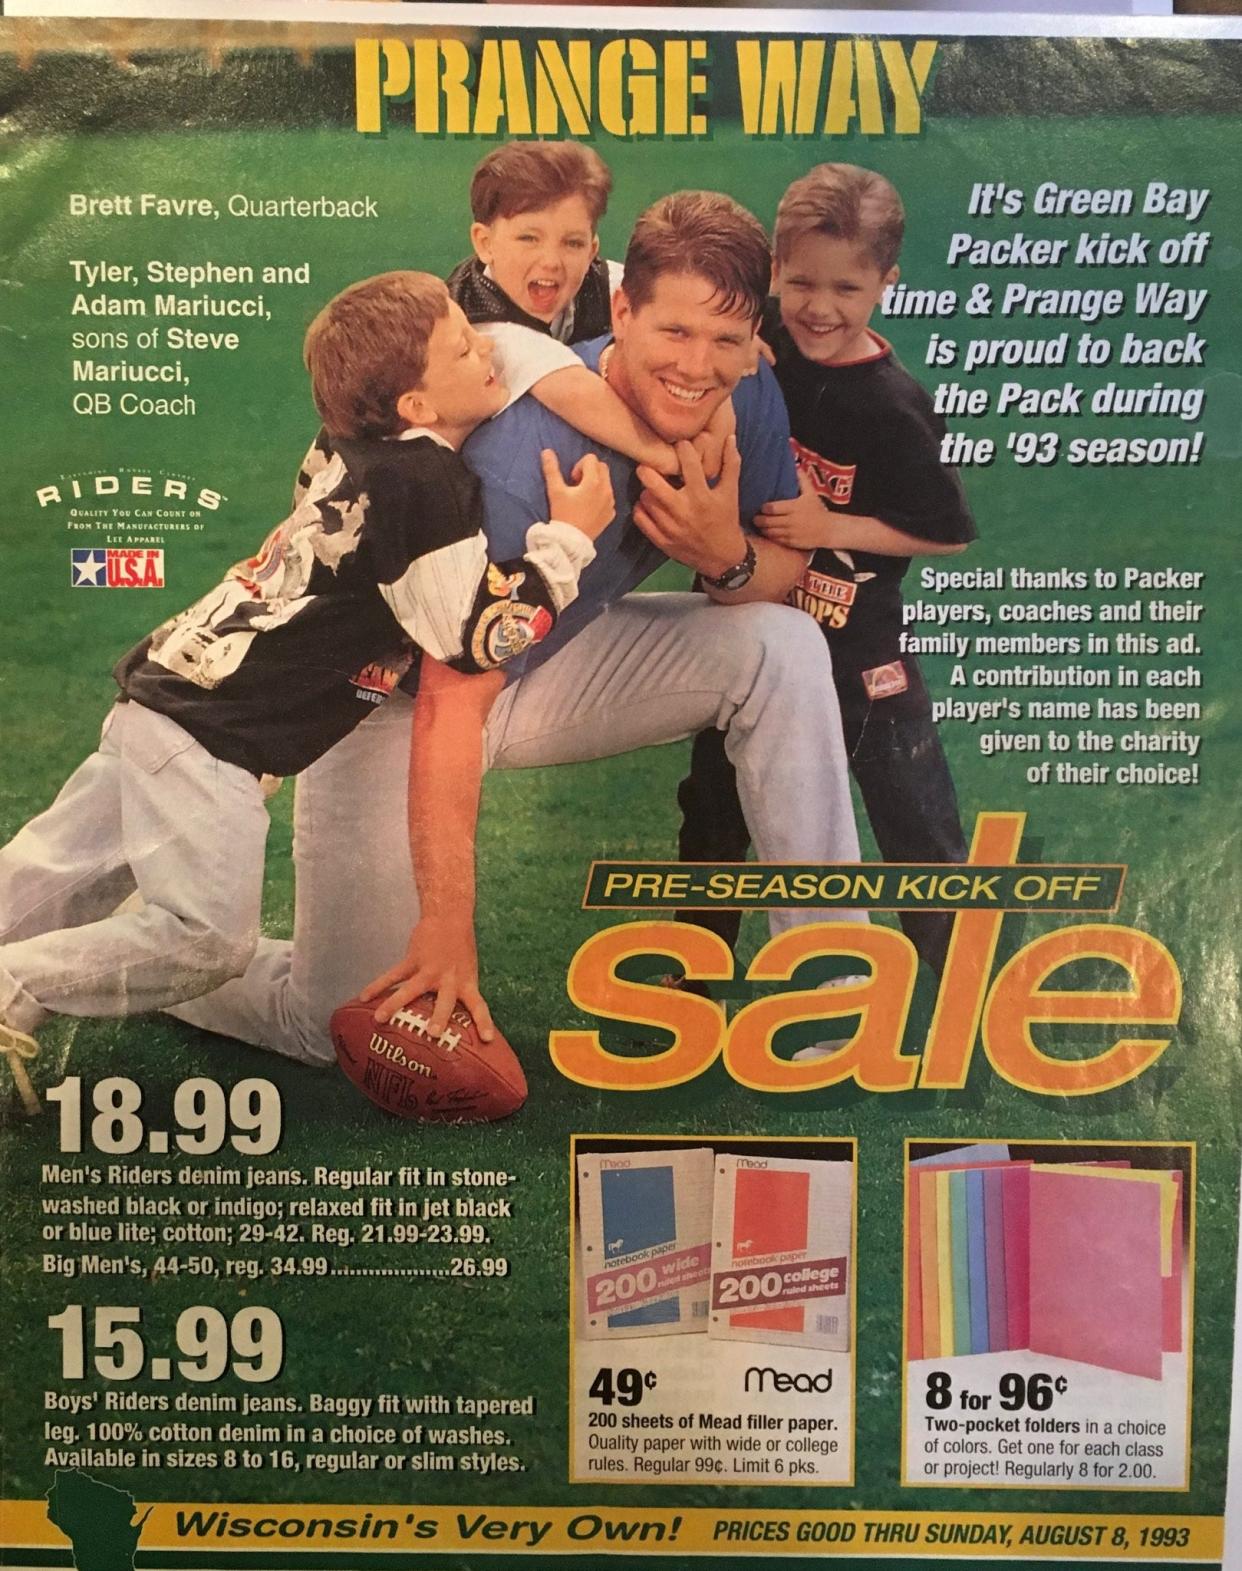 As a kid, Stephen Mariucci, center, starred with his brothers, Tyler and Adam, and Green Bay Packers quarterback Brett Favre in a 1993 circular for discount department store Prange Way.